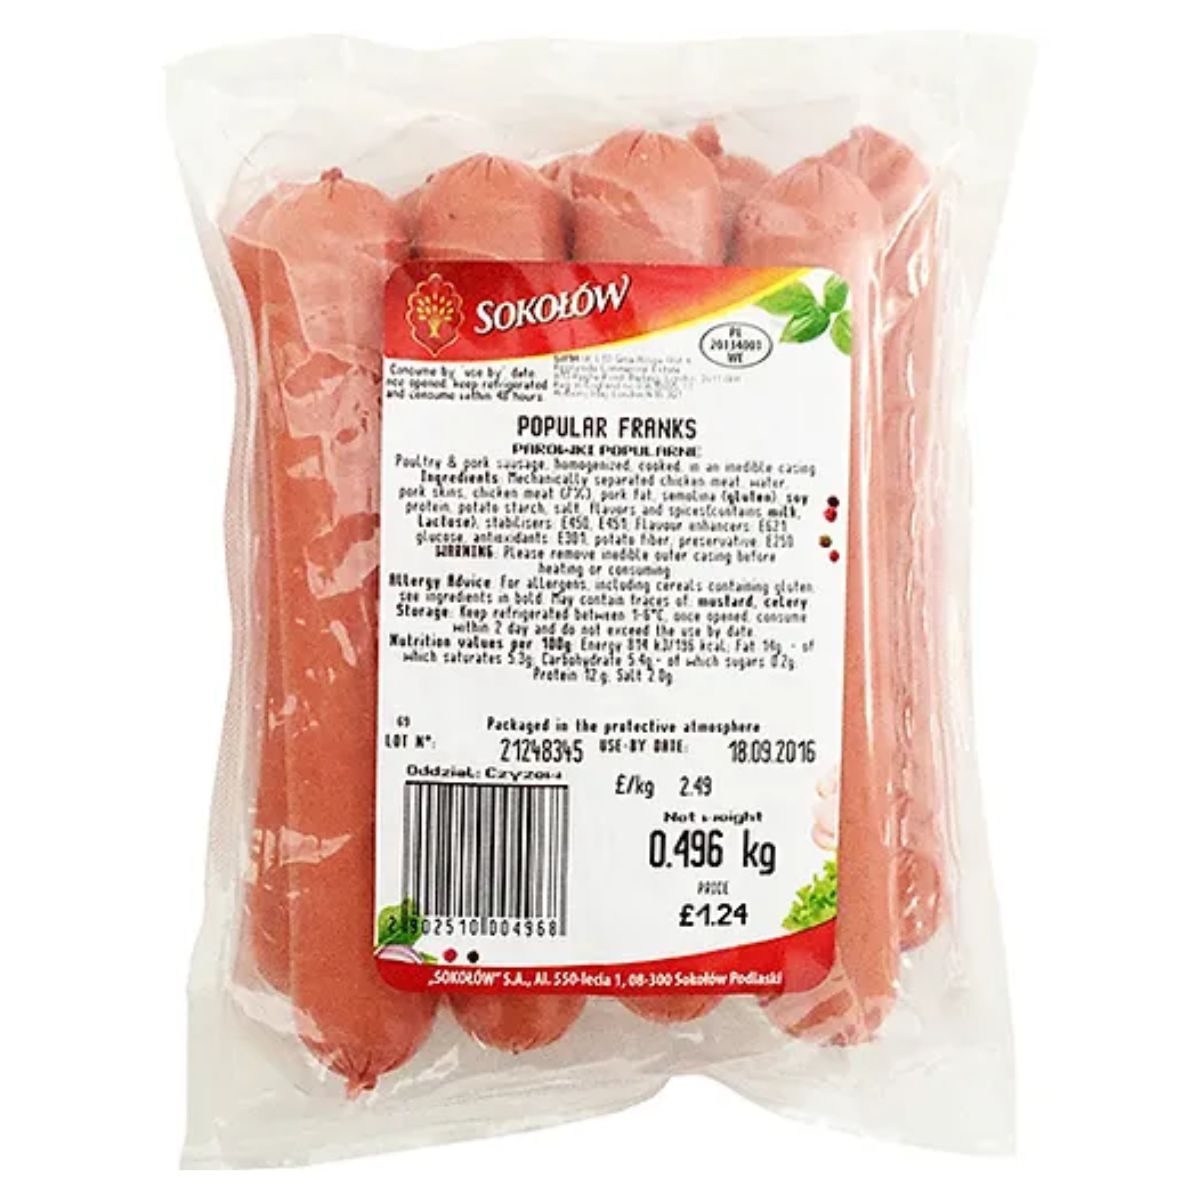 Sokolow - Popular Franks - 510g (Varies) in a plastic bag on a white background.